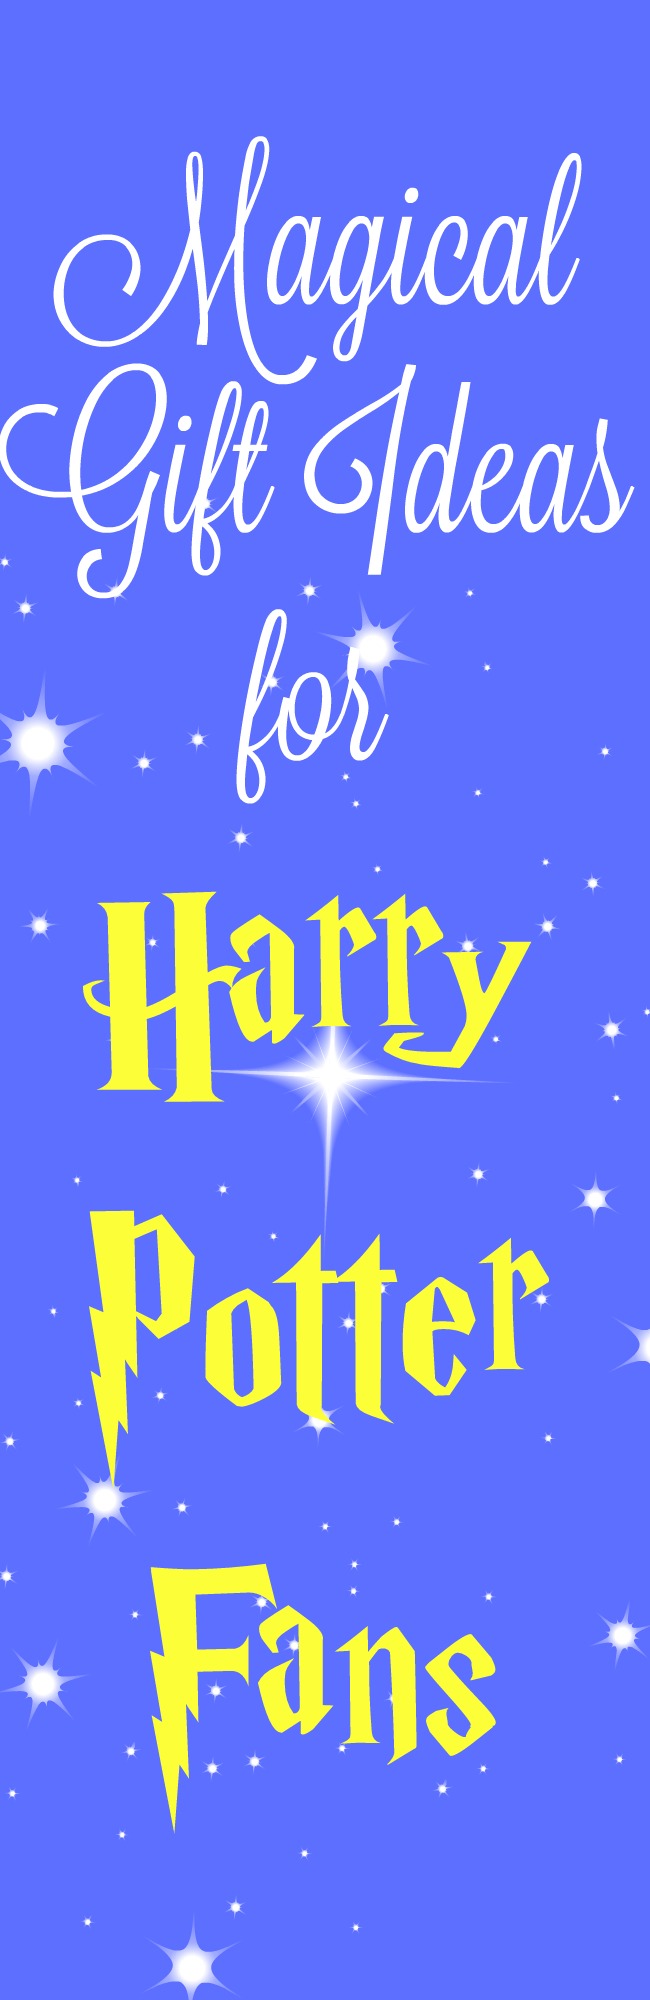 Magical gift ideas for Harry Potter fans